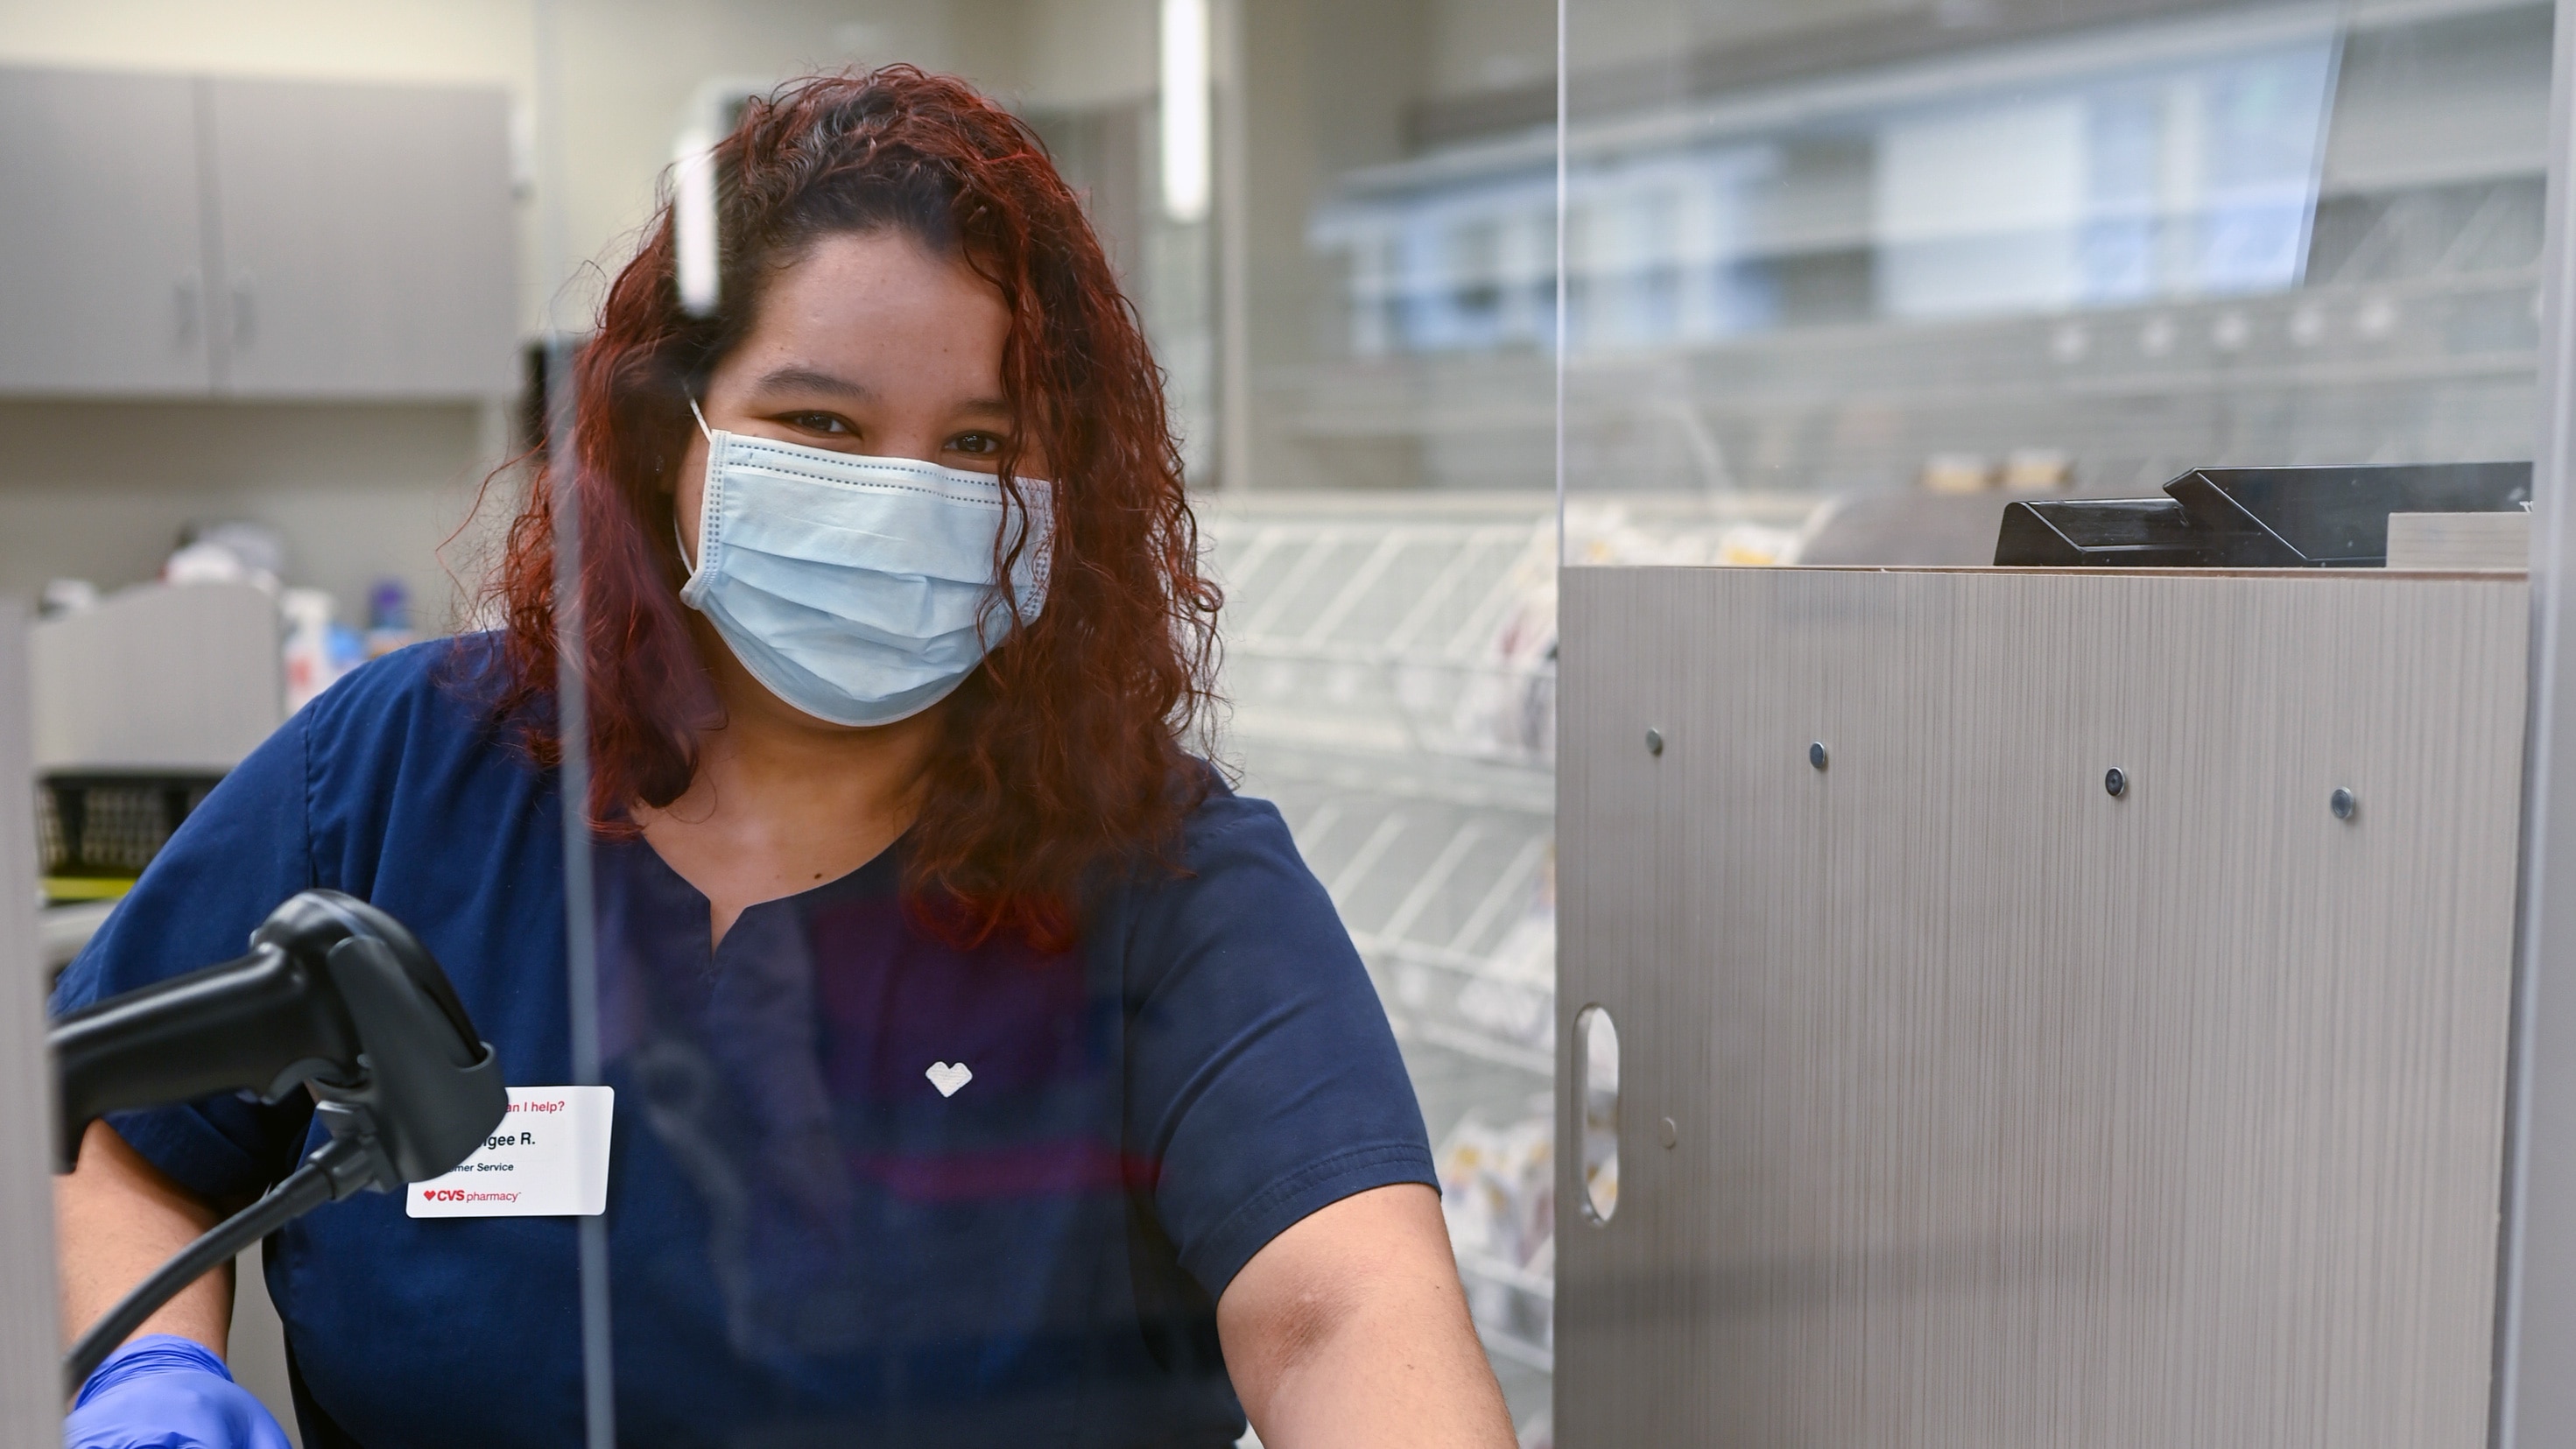 A CVS Pharmacy technician prepares prescriptions while wearing personal protective equipment (PPE) behind a plexiglass screen.